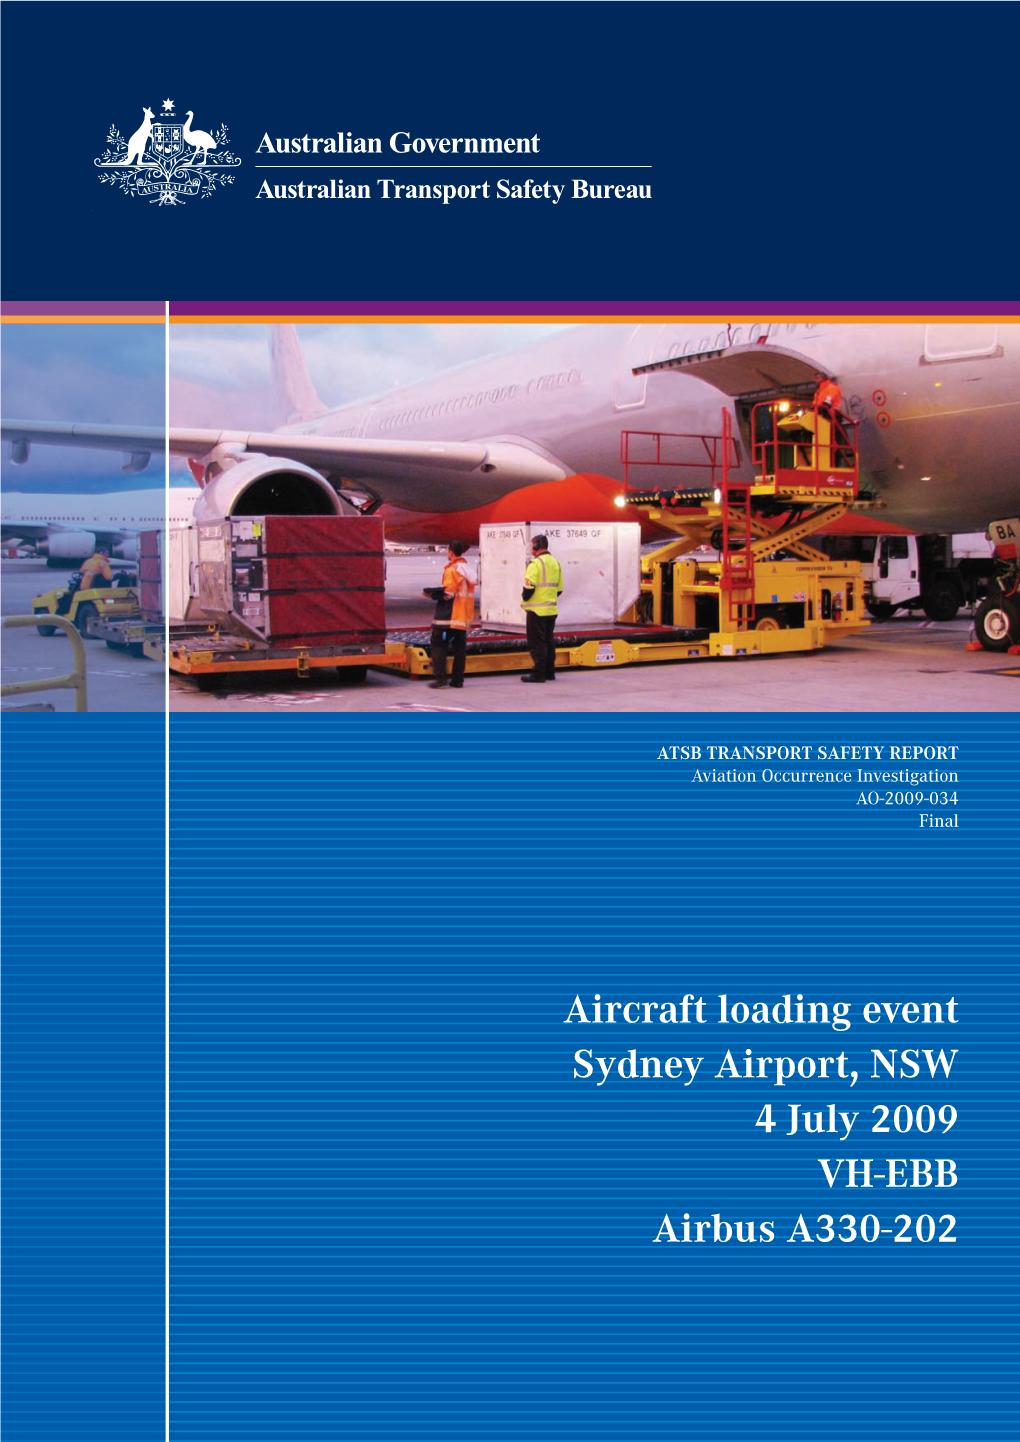 Aircraft Loading Event – Sydney Airport, NSW – 4 July 2009 - VH-EBB, Airbus A330-202